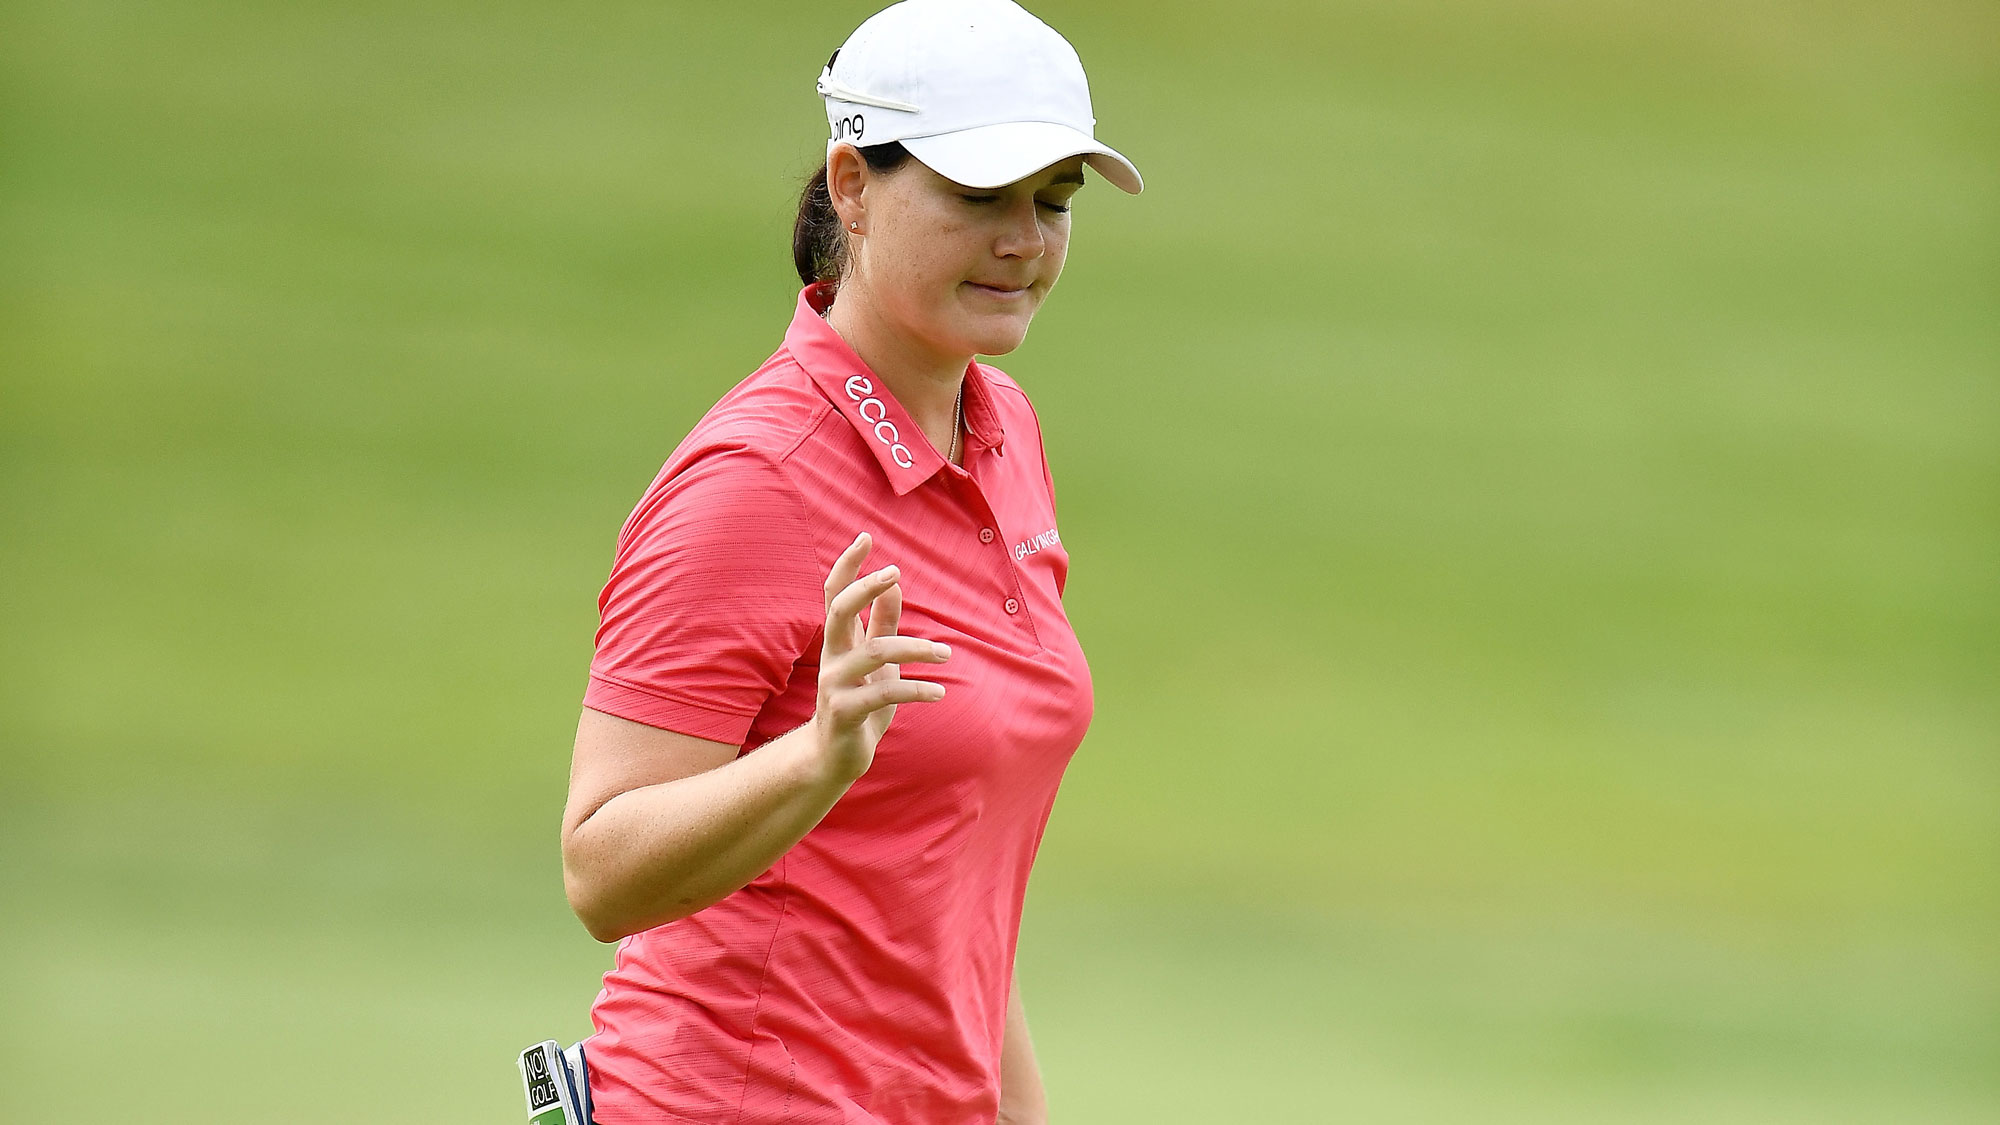 Caroline Masson After a Birdie at the Meijer LPGA Classic 